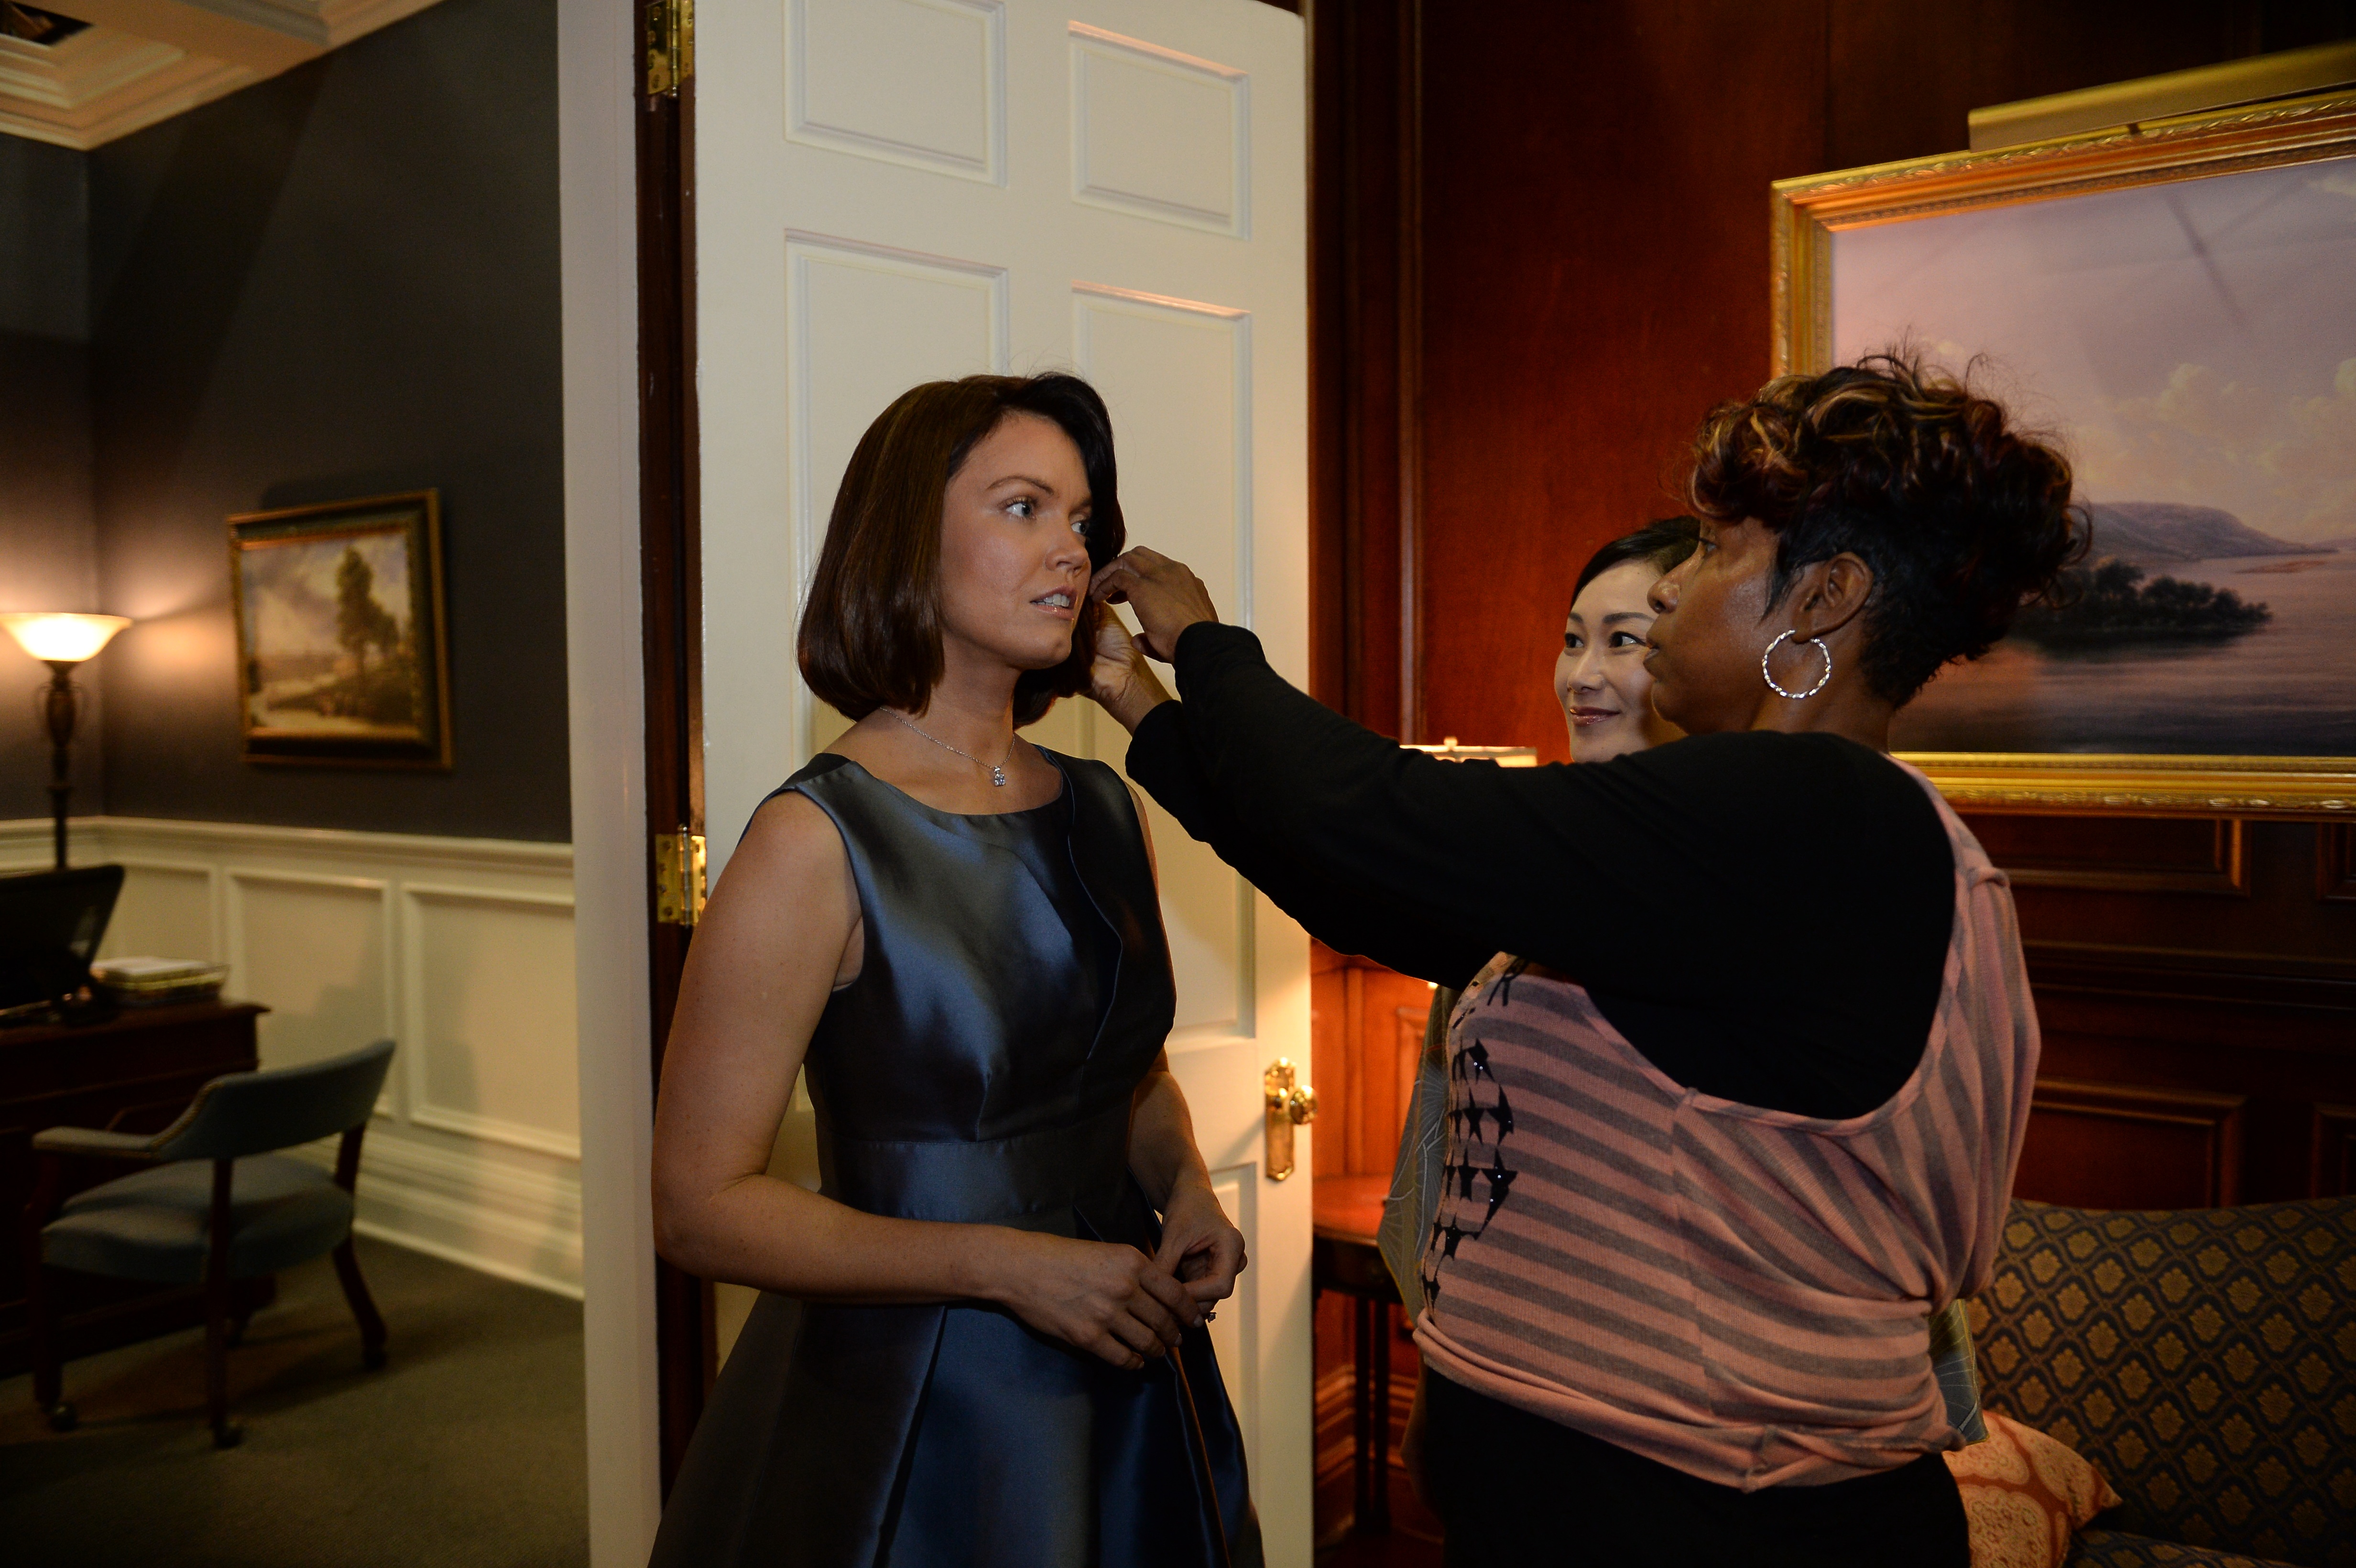 Flashback Classic Bob cut and styled for Scandal season 3 actress Bellamy Young